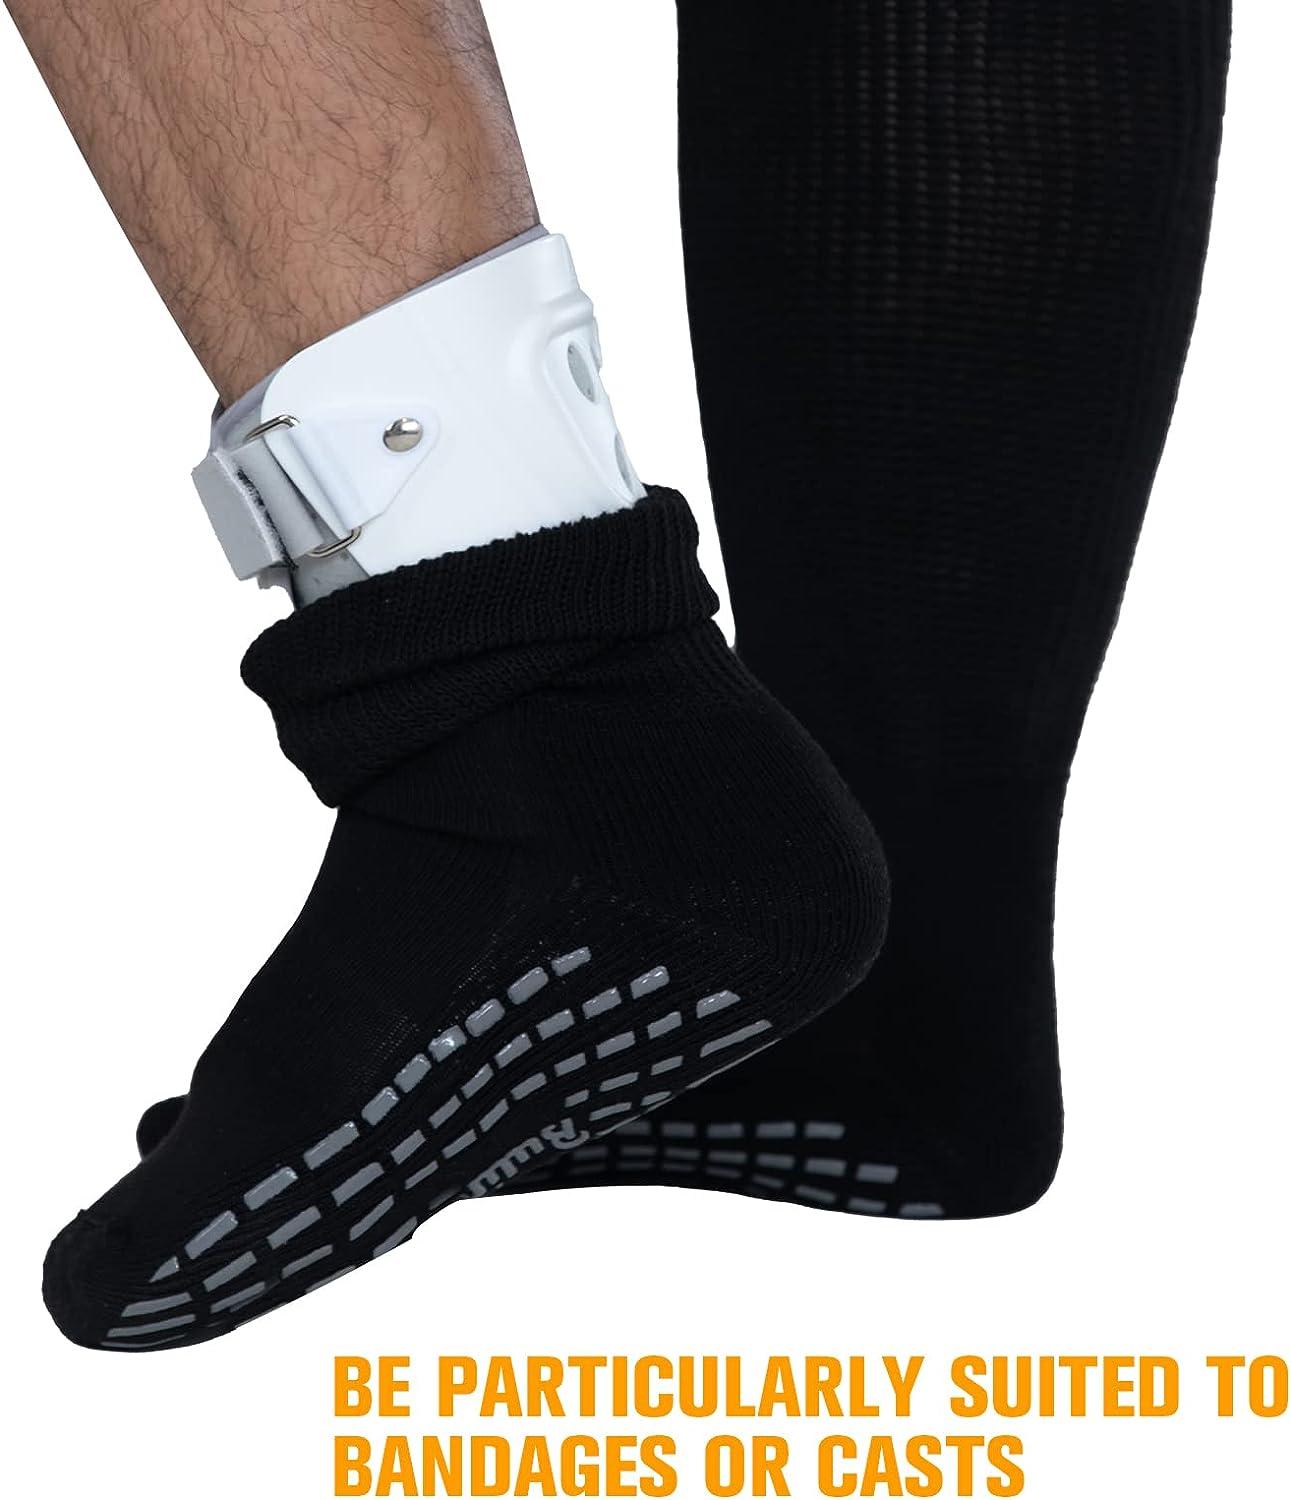 How to Find Extra-Wide Socks for Bunions, Wide Feet, and Swollen Ankles